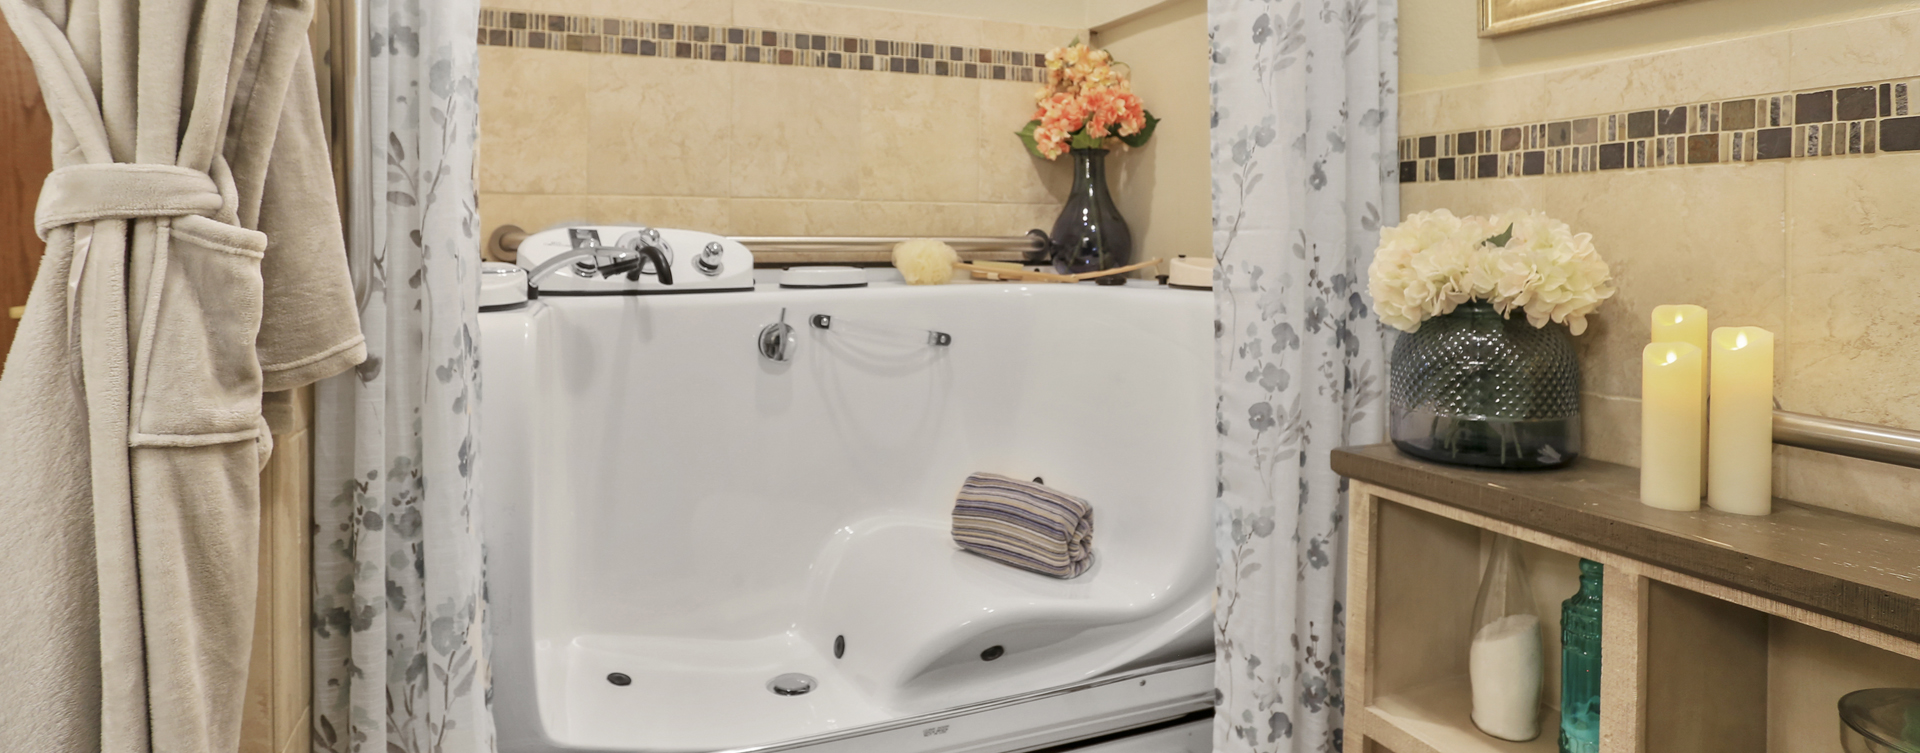 Our whirlpool bathtub creates a spa-like environment tailored to enhance your relaxation and enjoyment at Bickford of Champaign